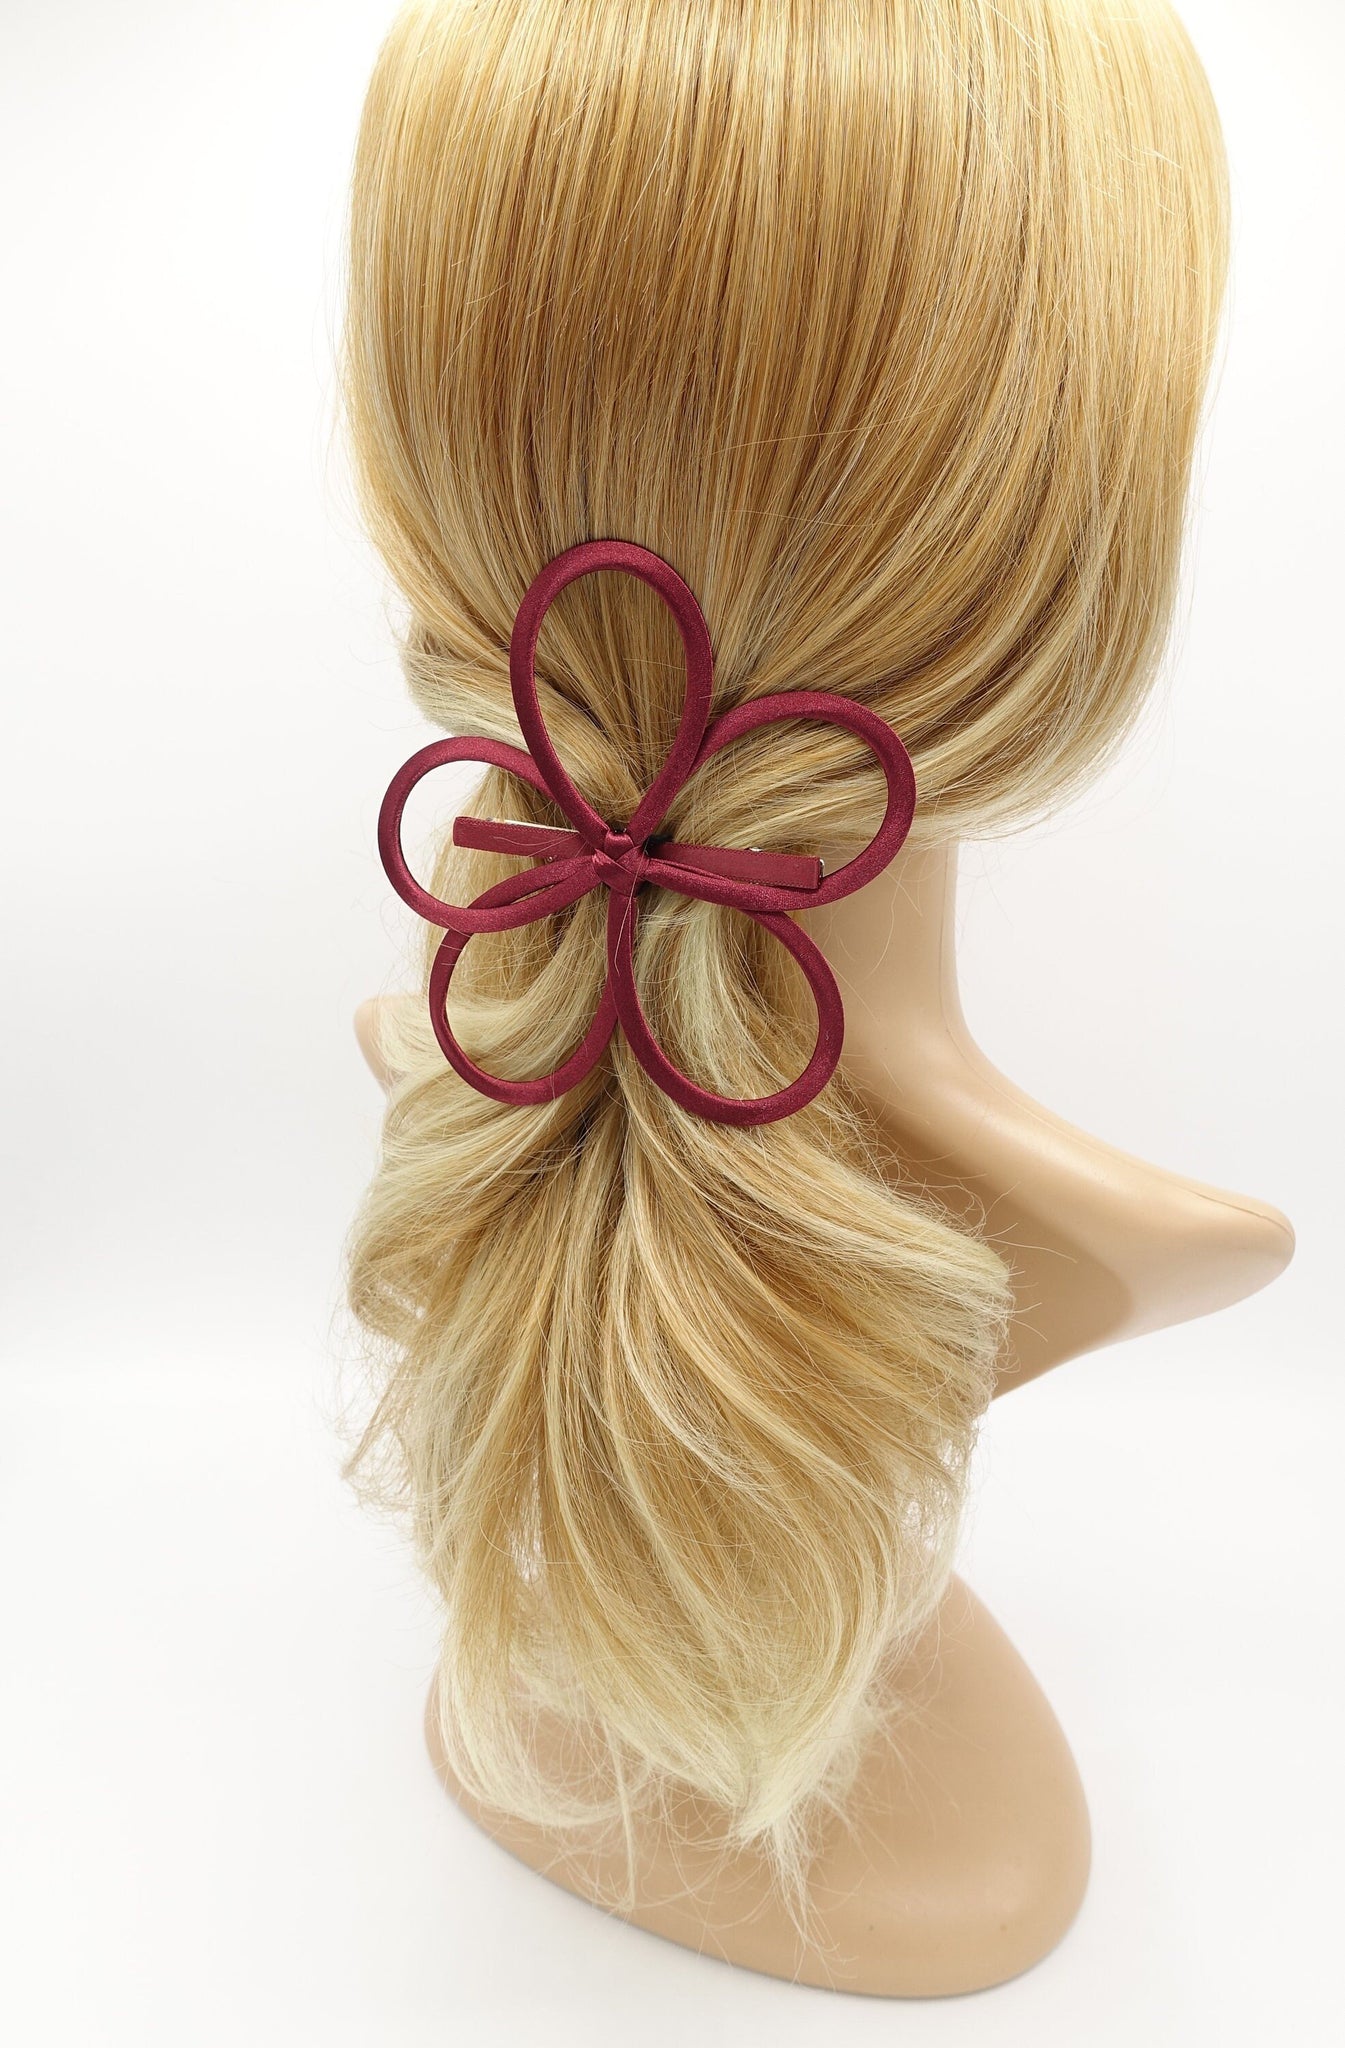 VeryShine petal hair clip wired flower hair accessory for women